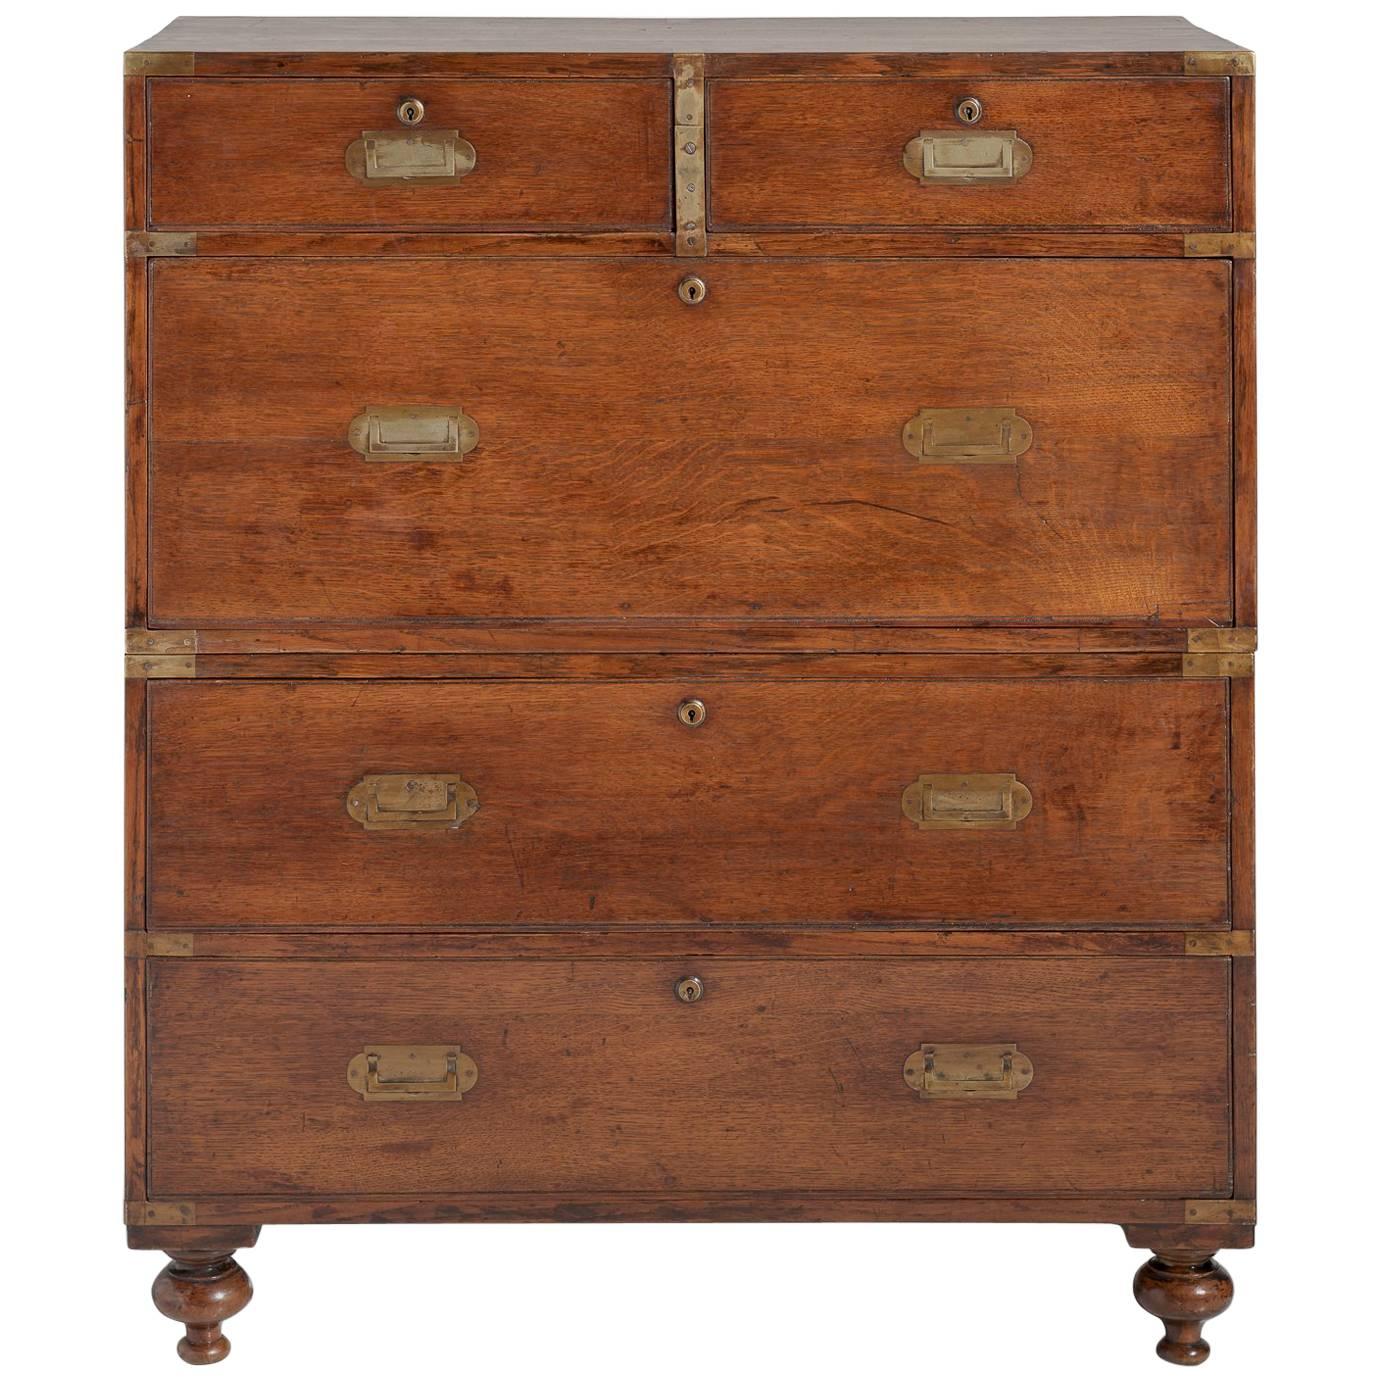 Campaign Chest of Drawers, England, circa 1910